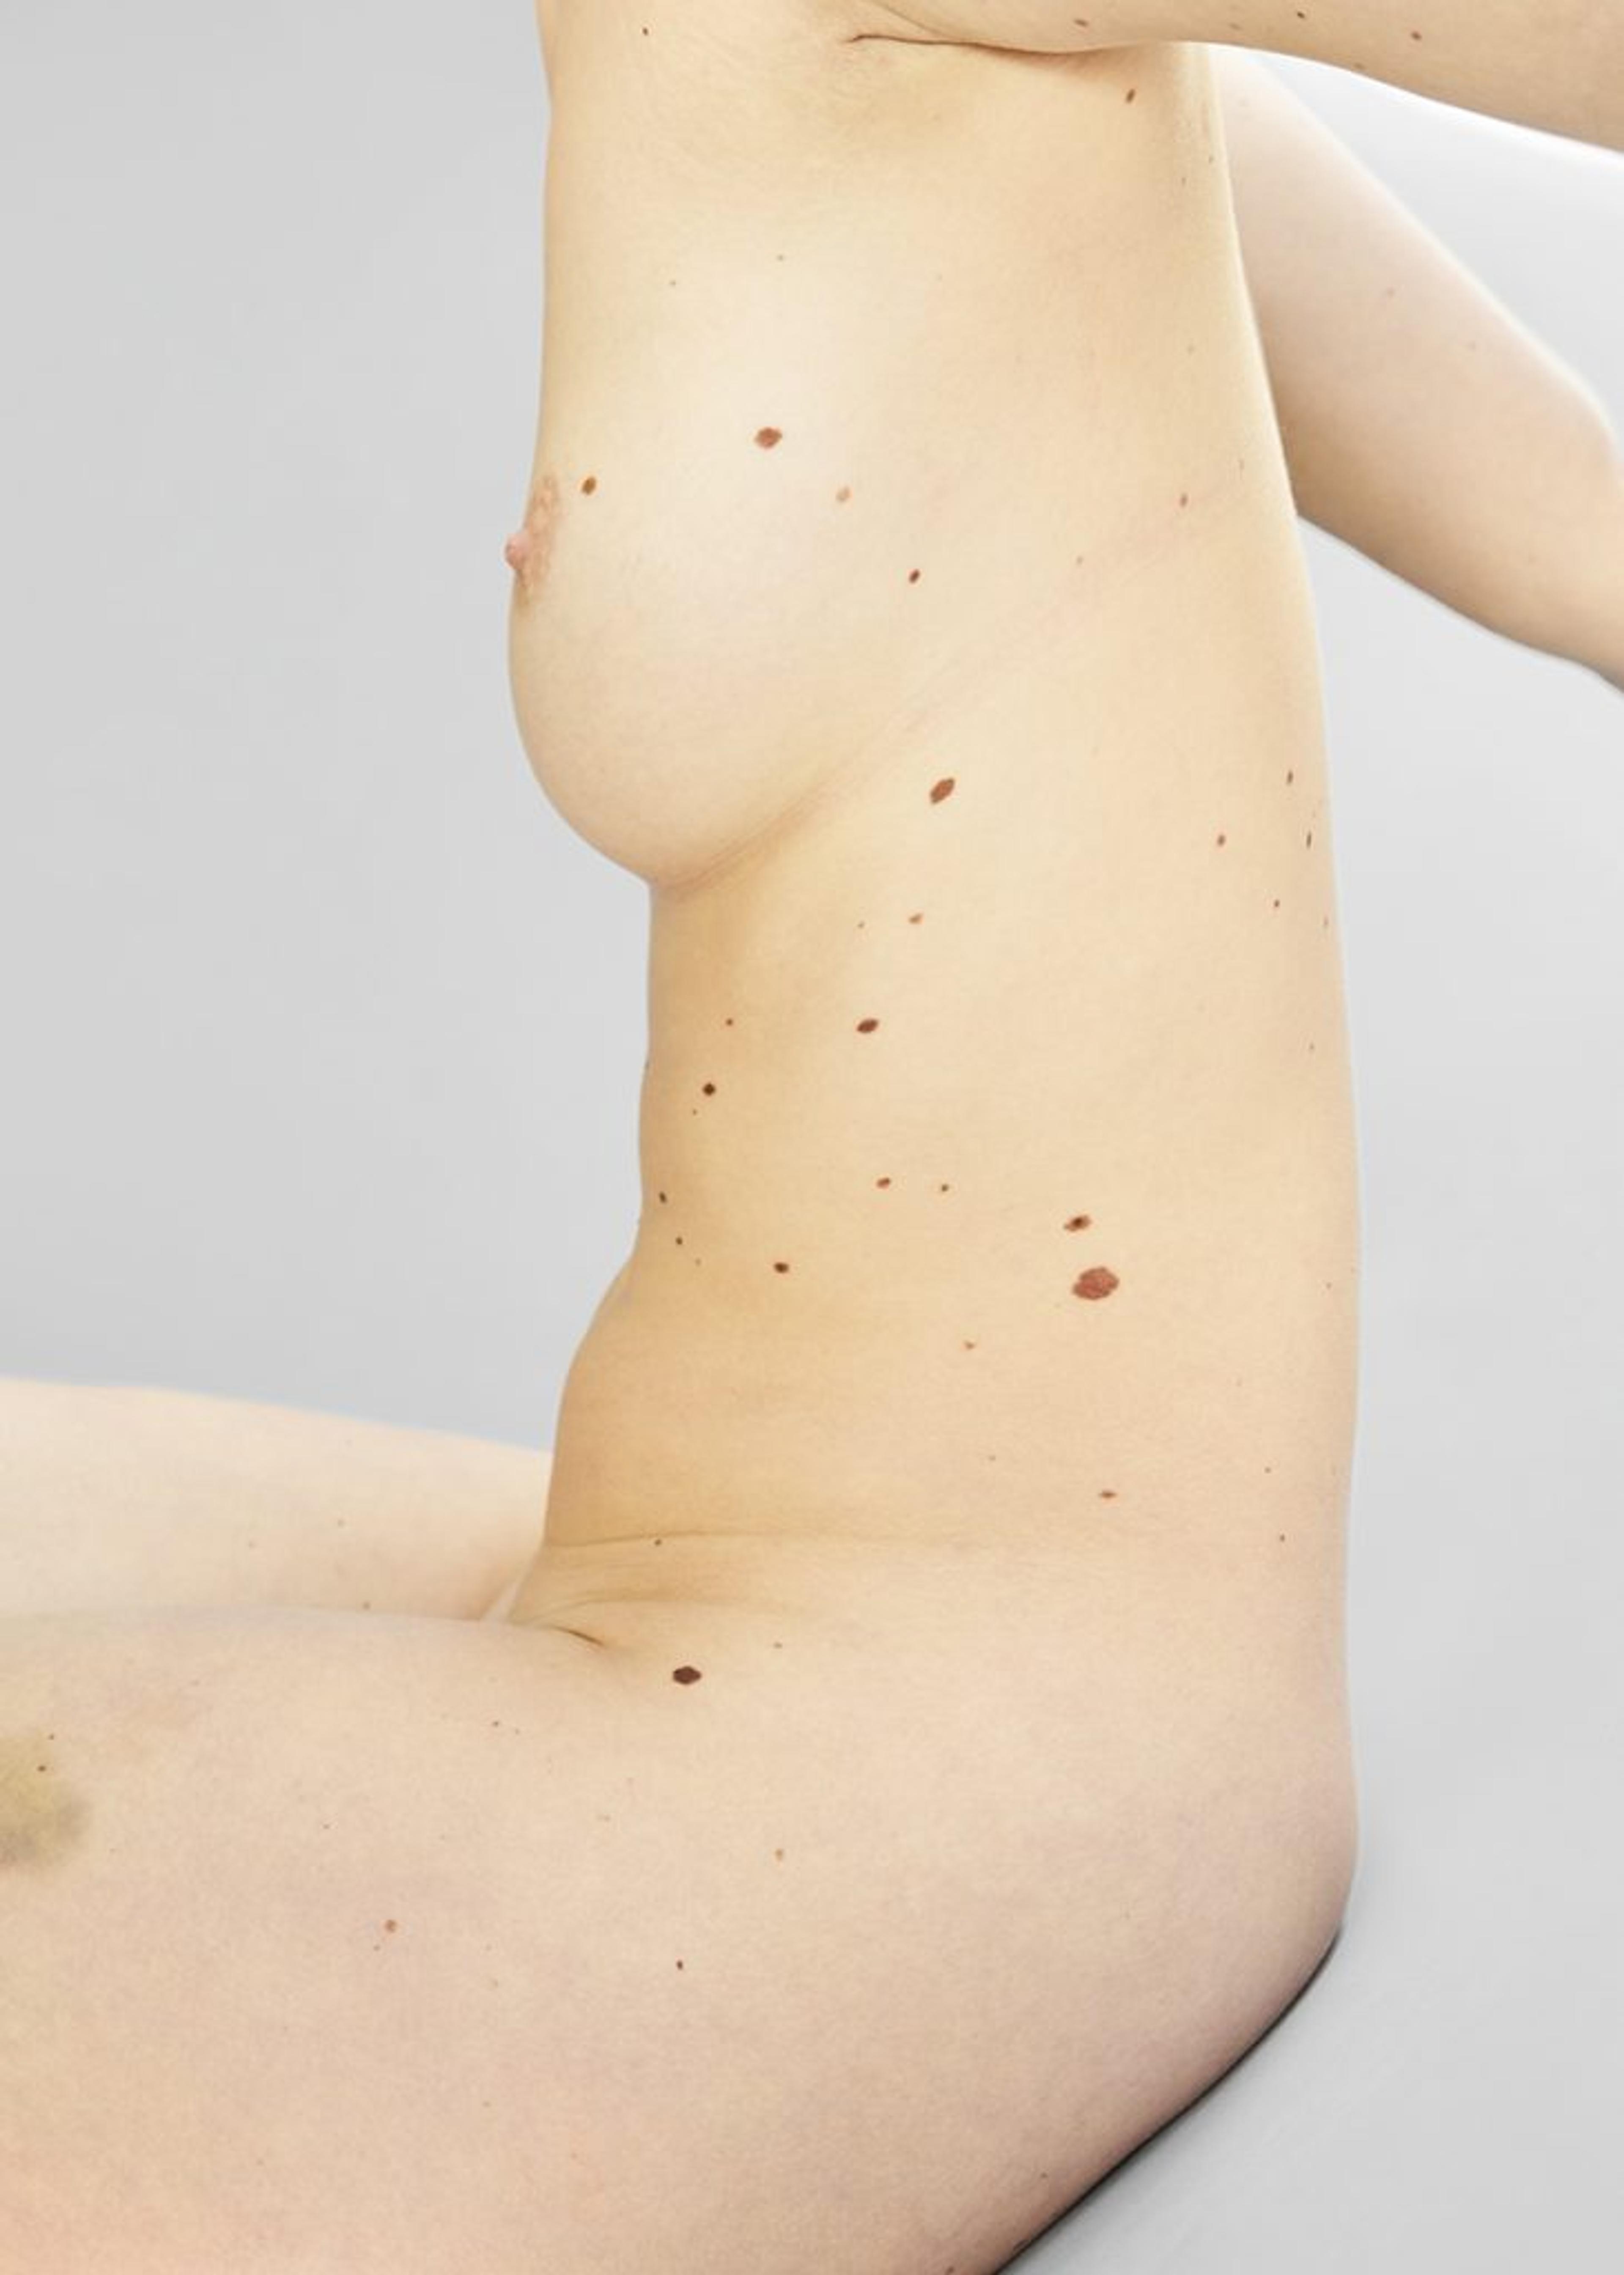 A female figure without clothing, featuring numerous spots covering her body.